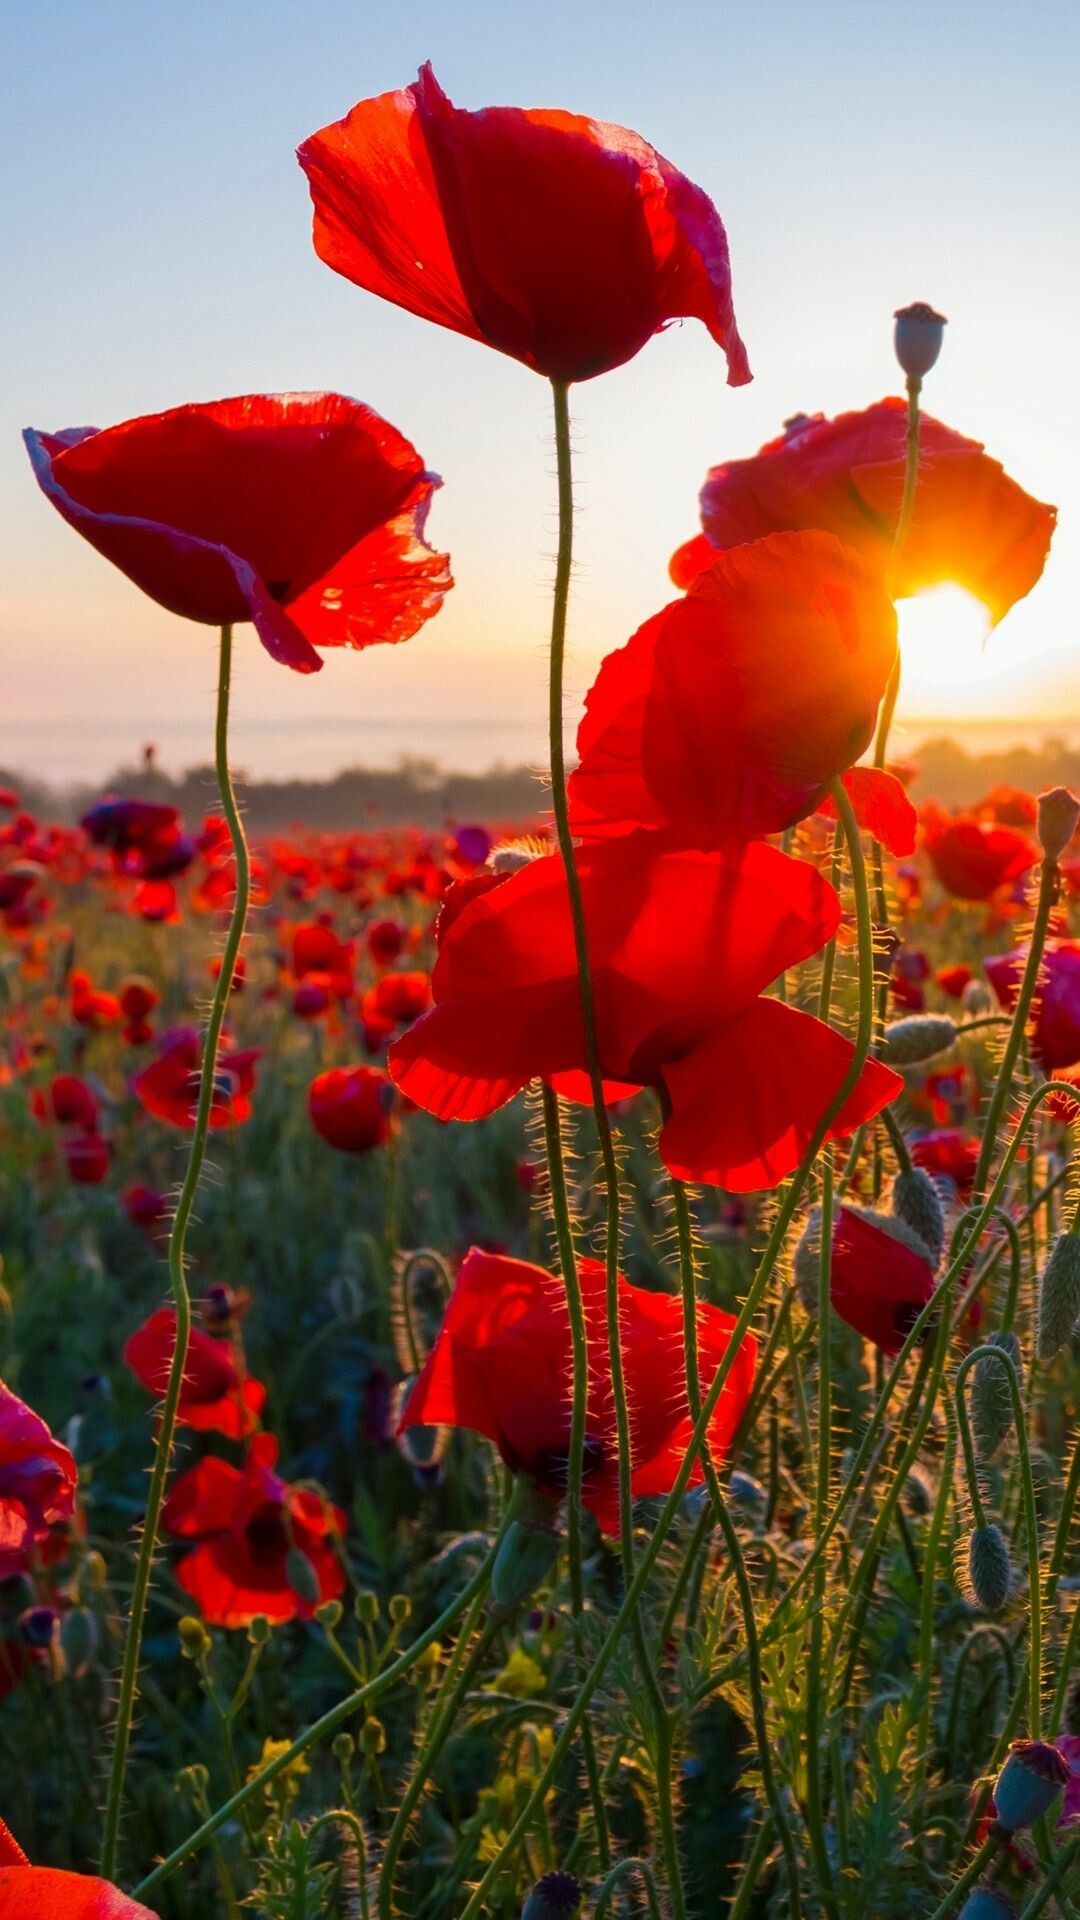 Poppy Flower: An ancient flowering plant that has been long desired by gardeners. 1080x1920 Full HD Wallpaper.